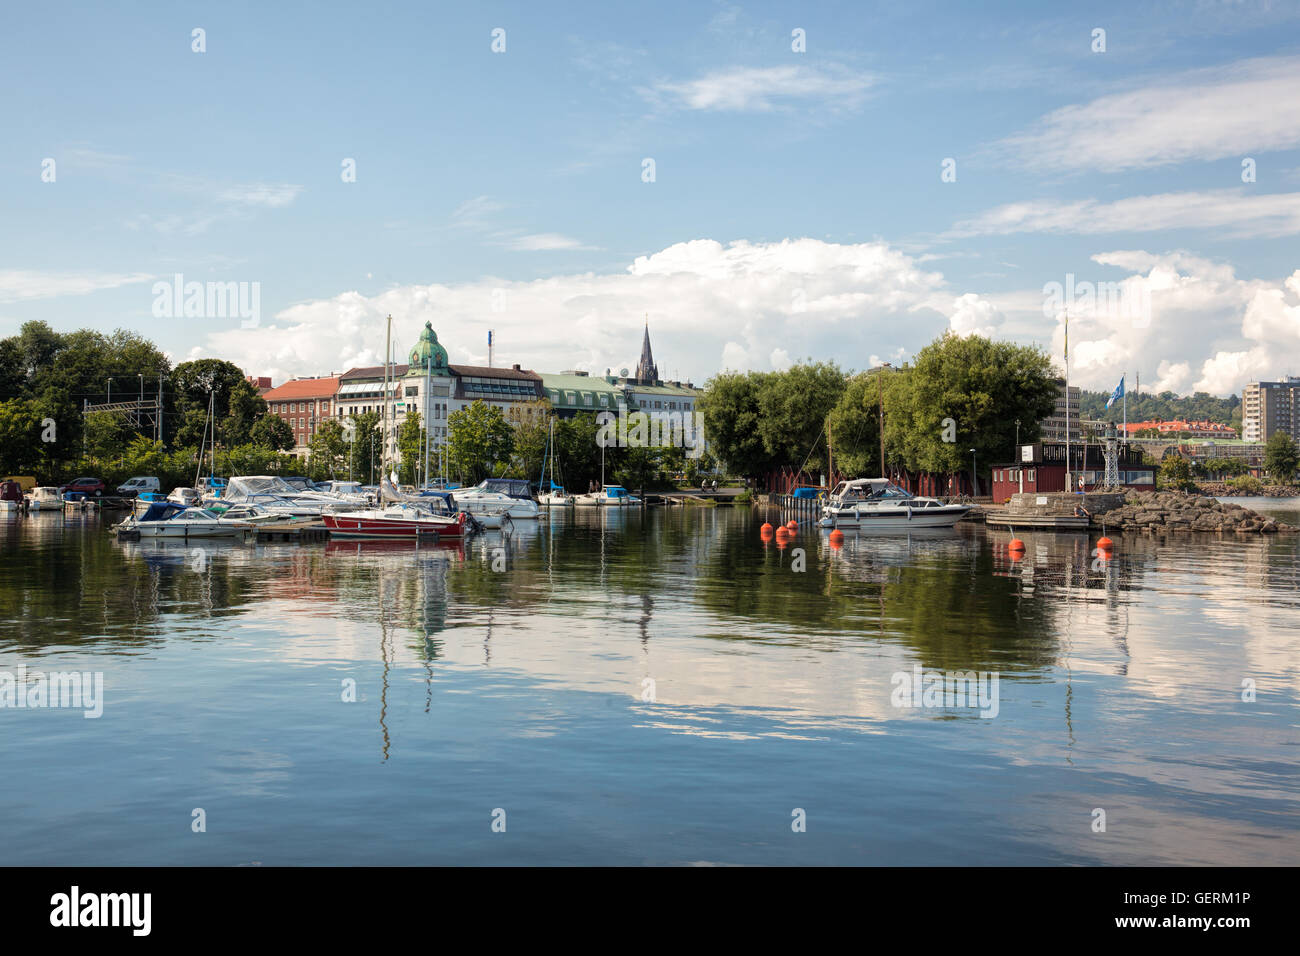 Jonkoping, Sweden - Jul 24, 2016 : Scene of the beautiful Jonkoping city, which is situated by the end of the huge lake Vattern. Stock Photo